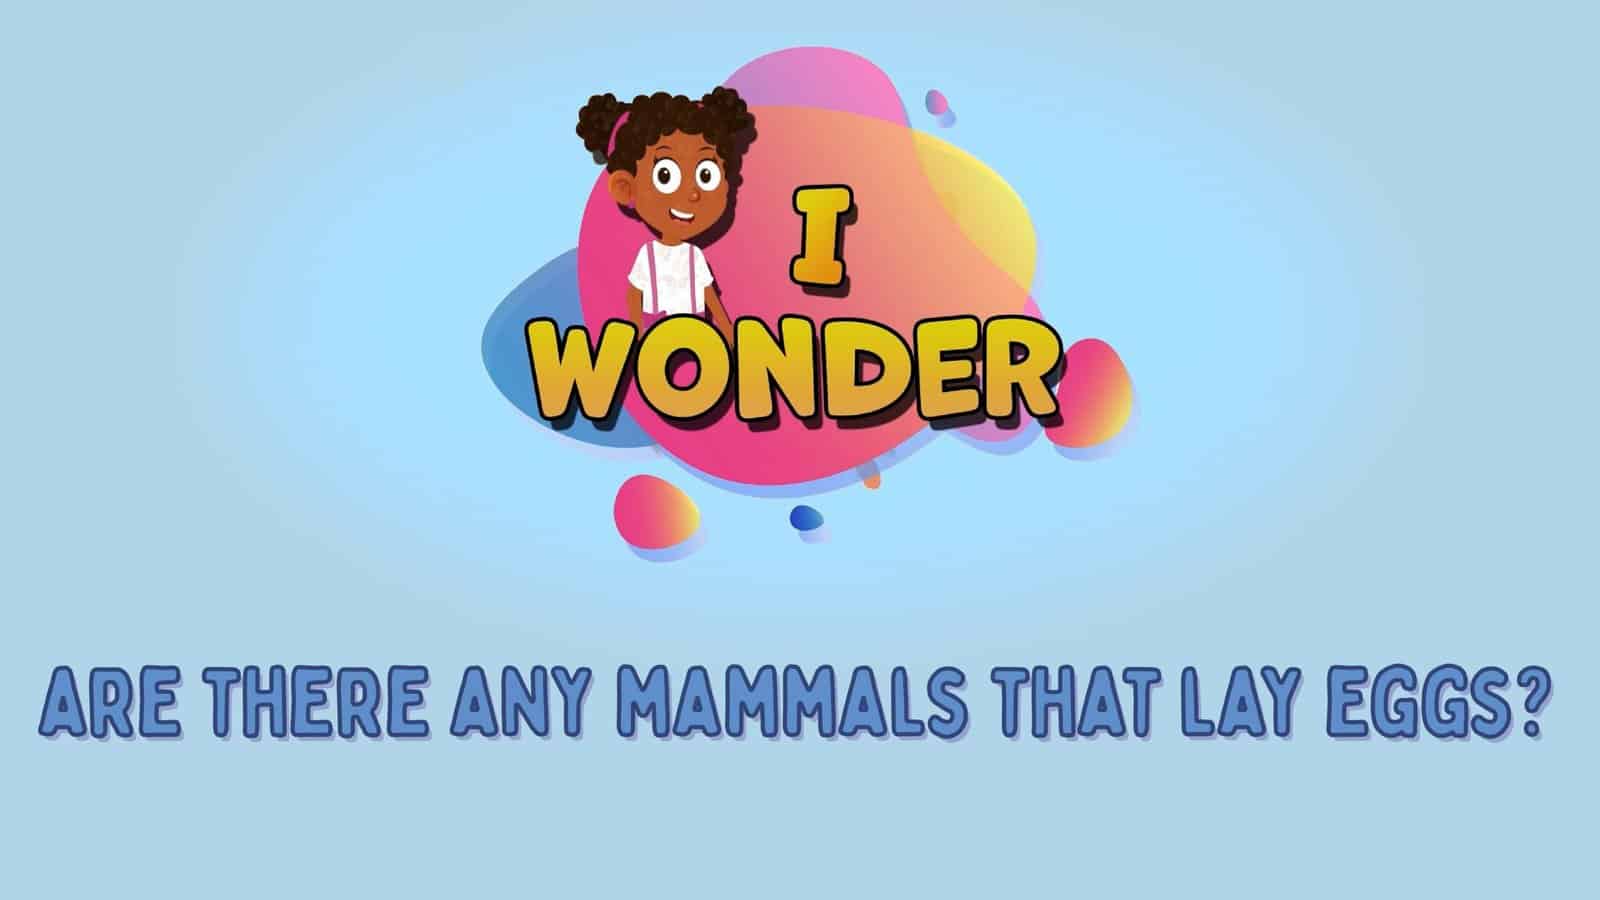 Are There Any Mammals That Lay Eggs?